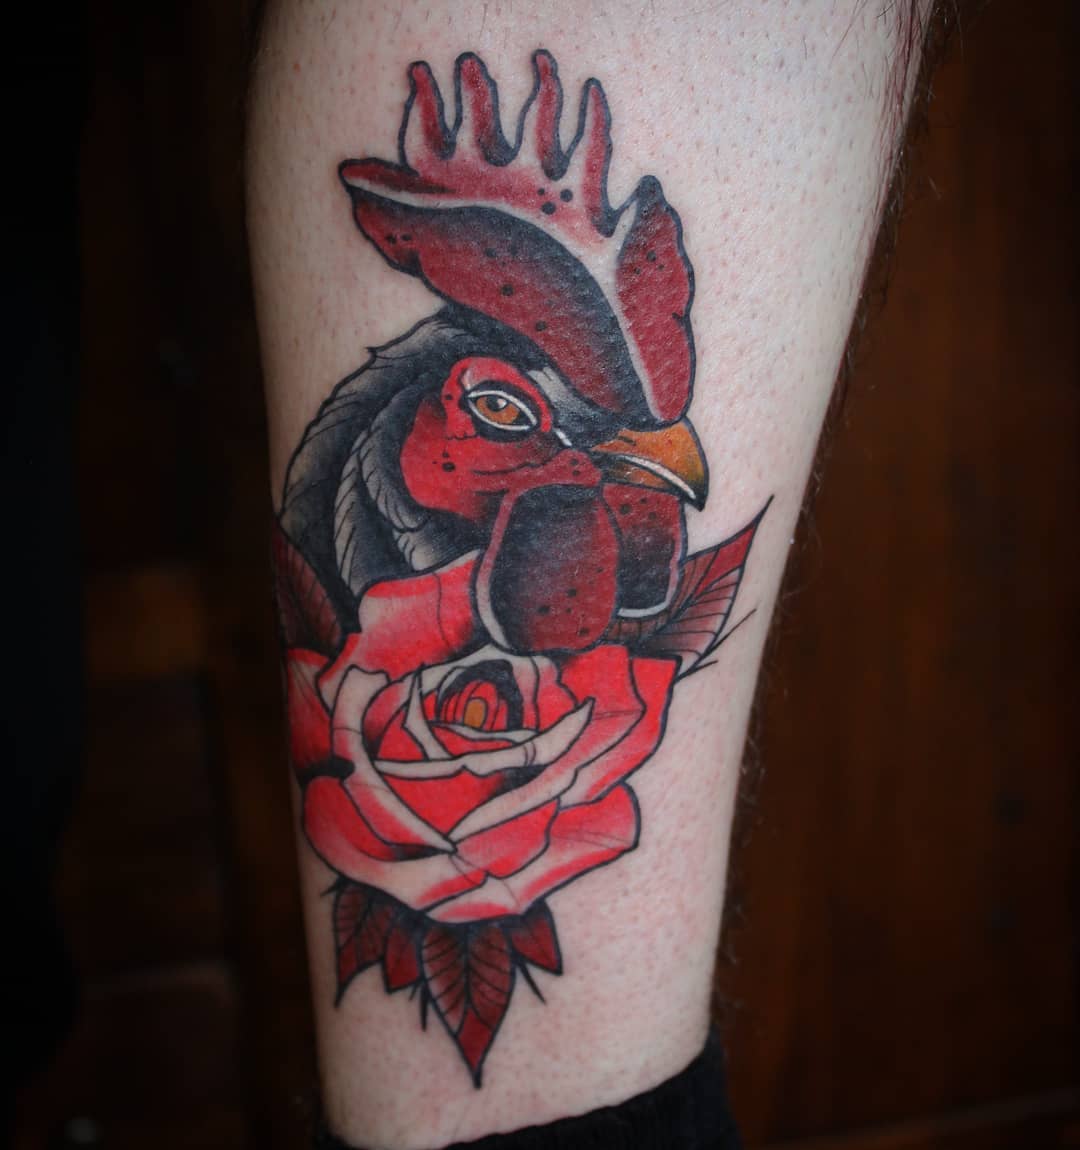 Everybody should have a big cock Thx @lasagneboy for the cool session
#germantat